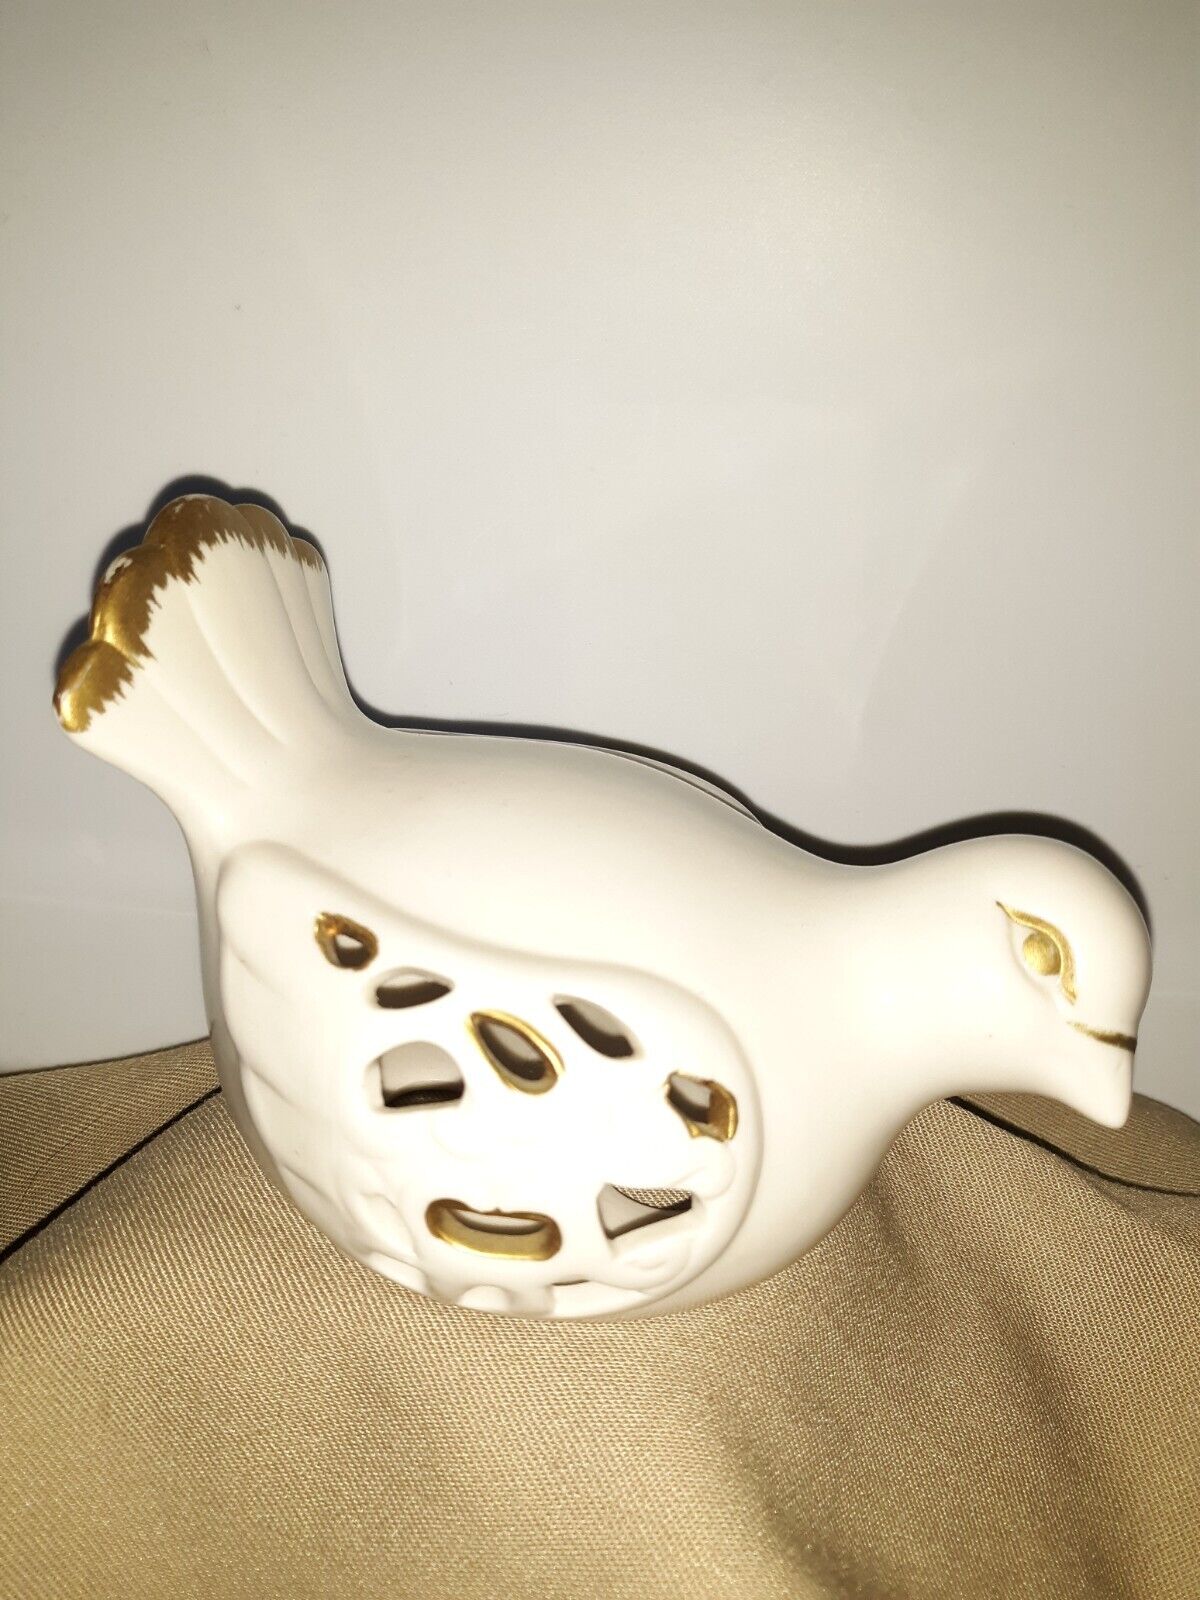 Vintage White Dove Figurine Accented with Gold Accent Ceramic Love Bird